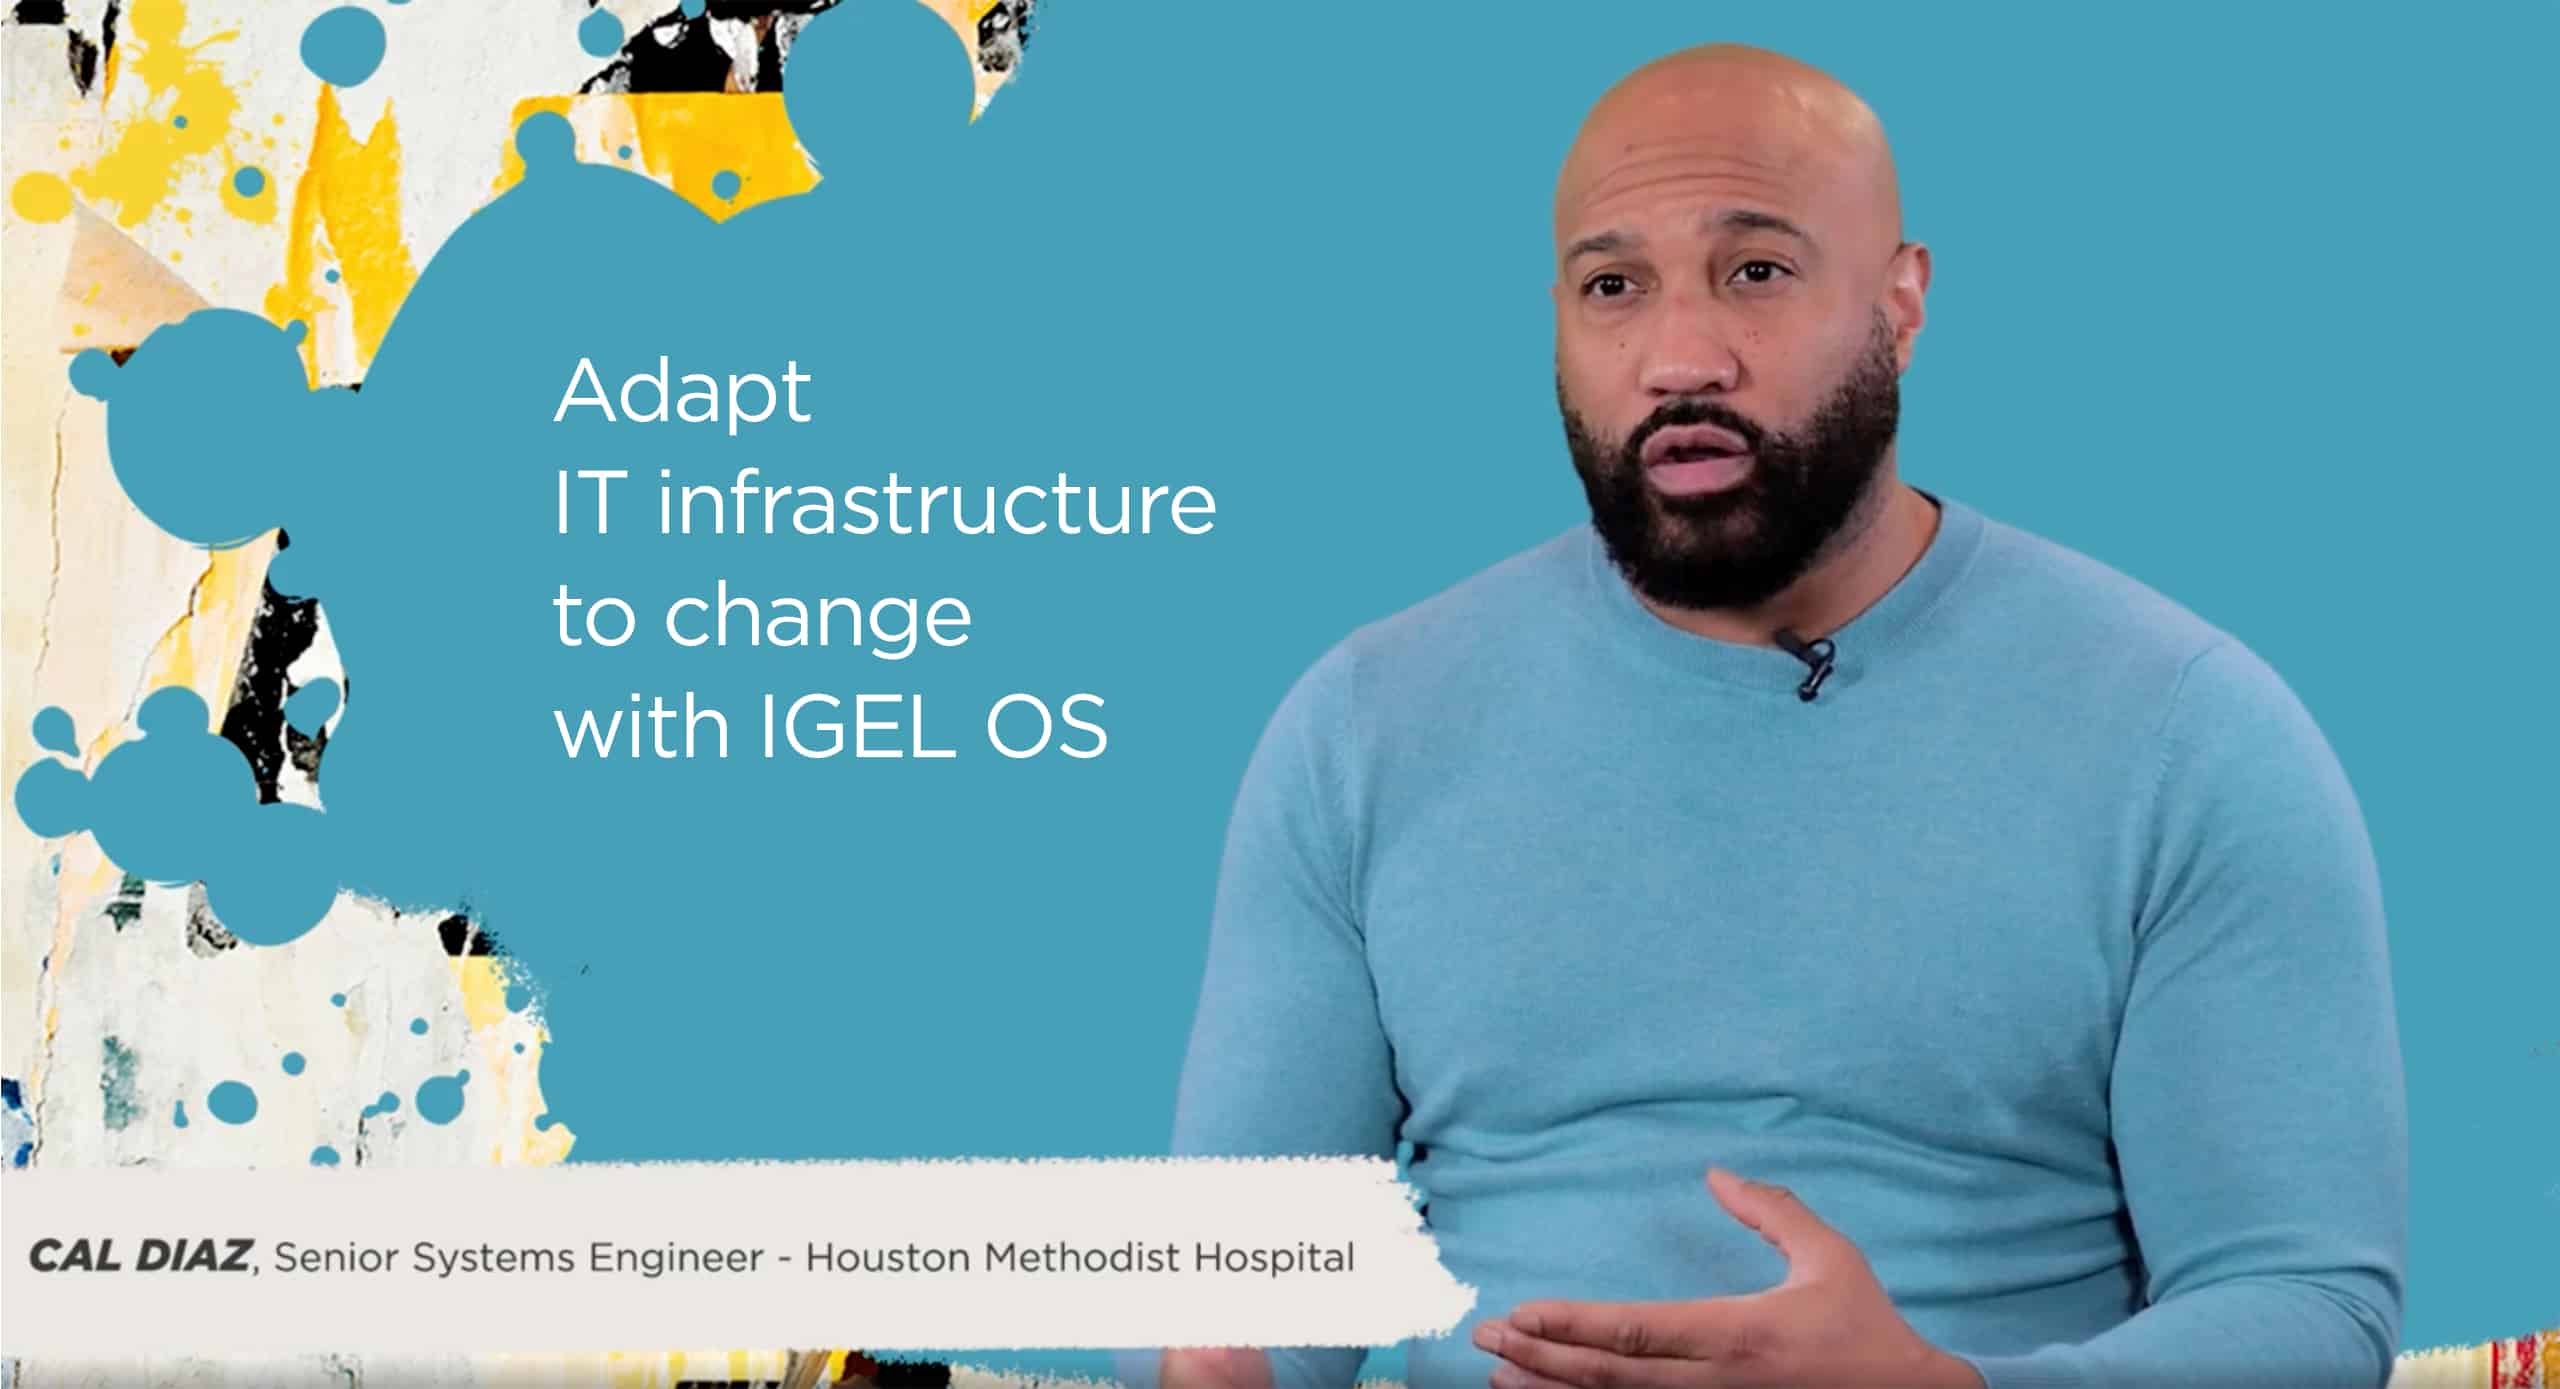 Adapt IT infrastructure to change with IGEL OS